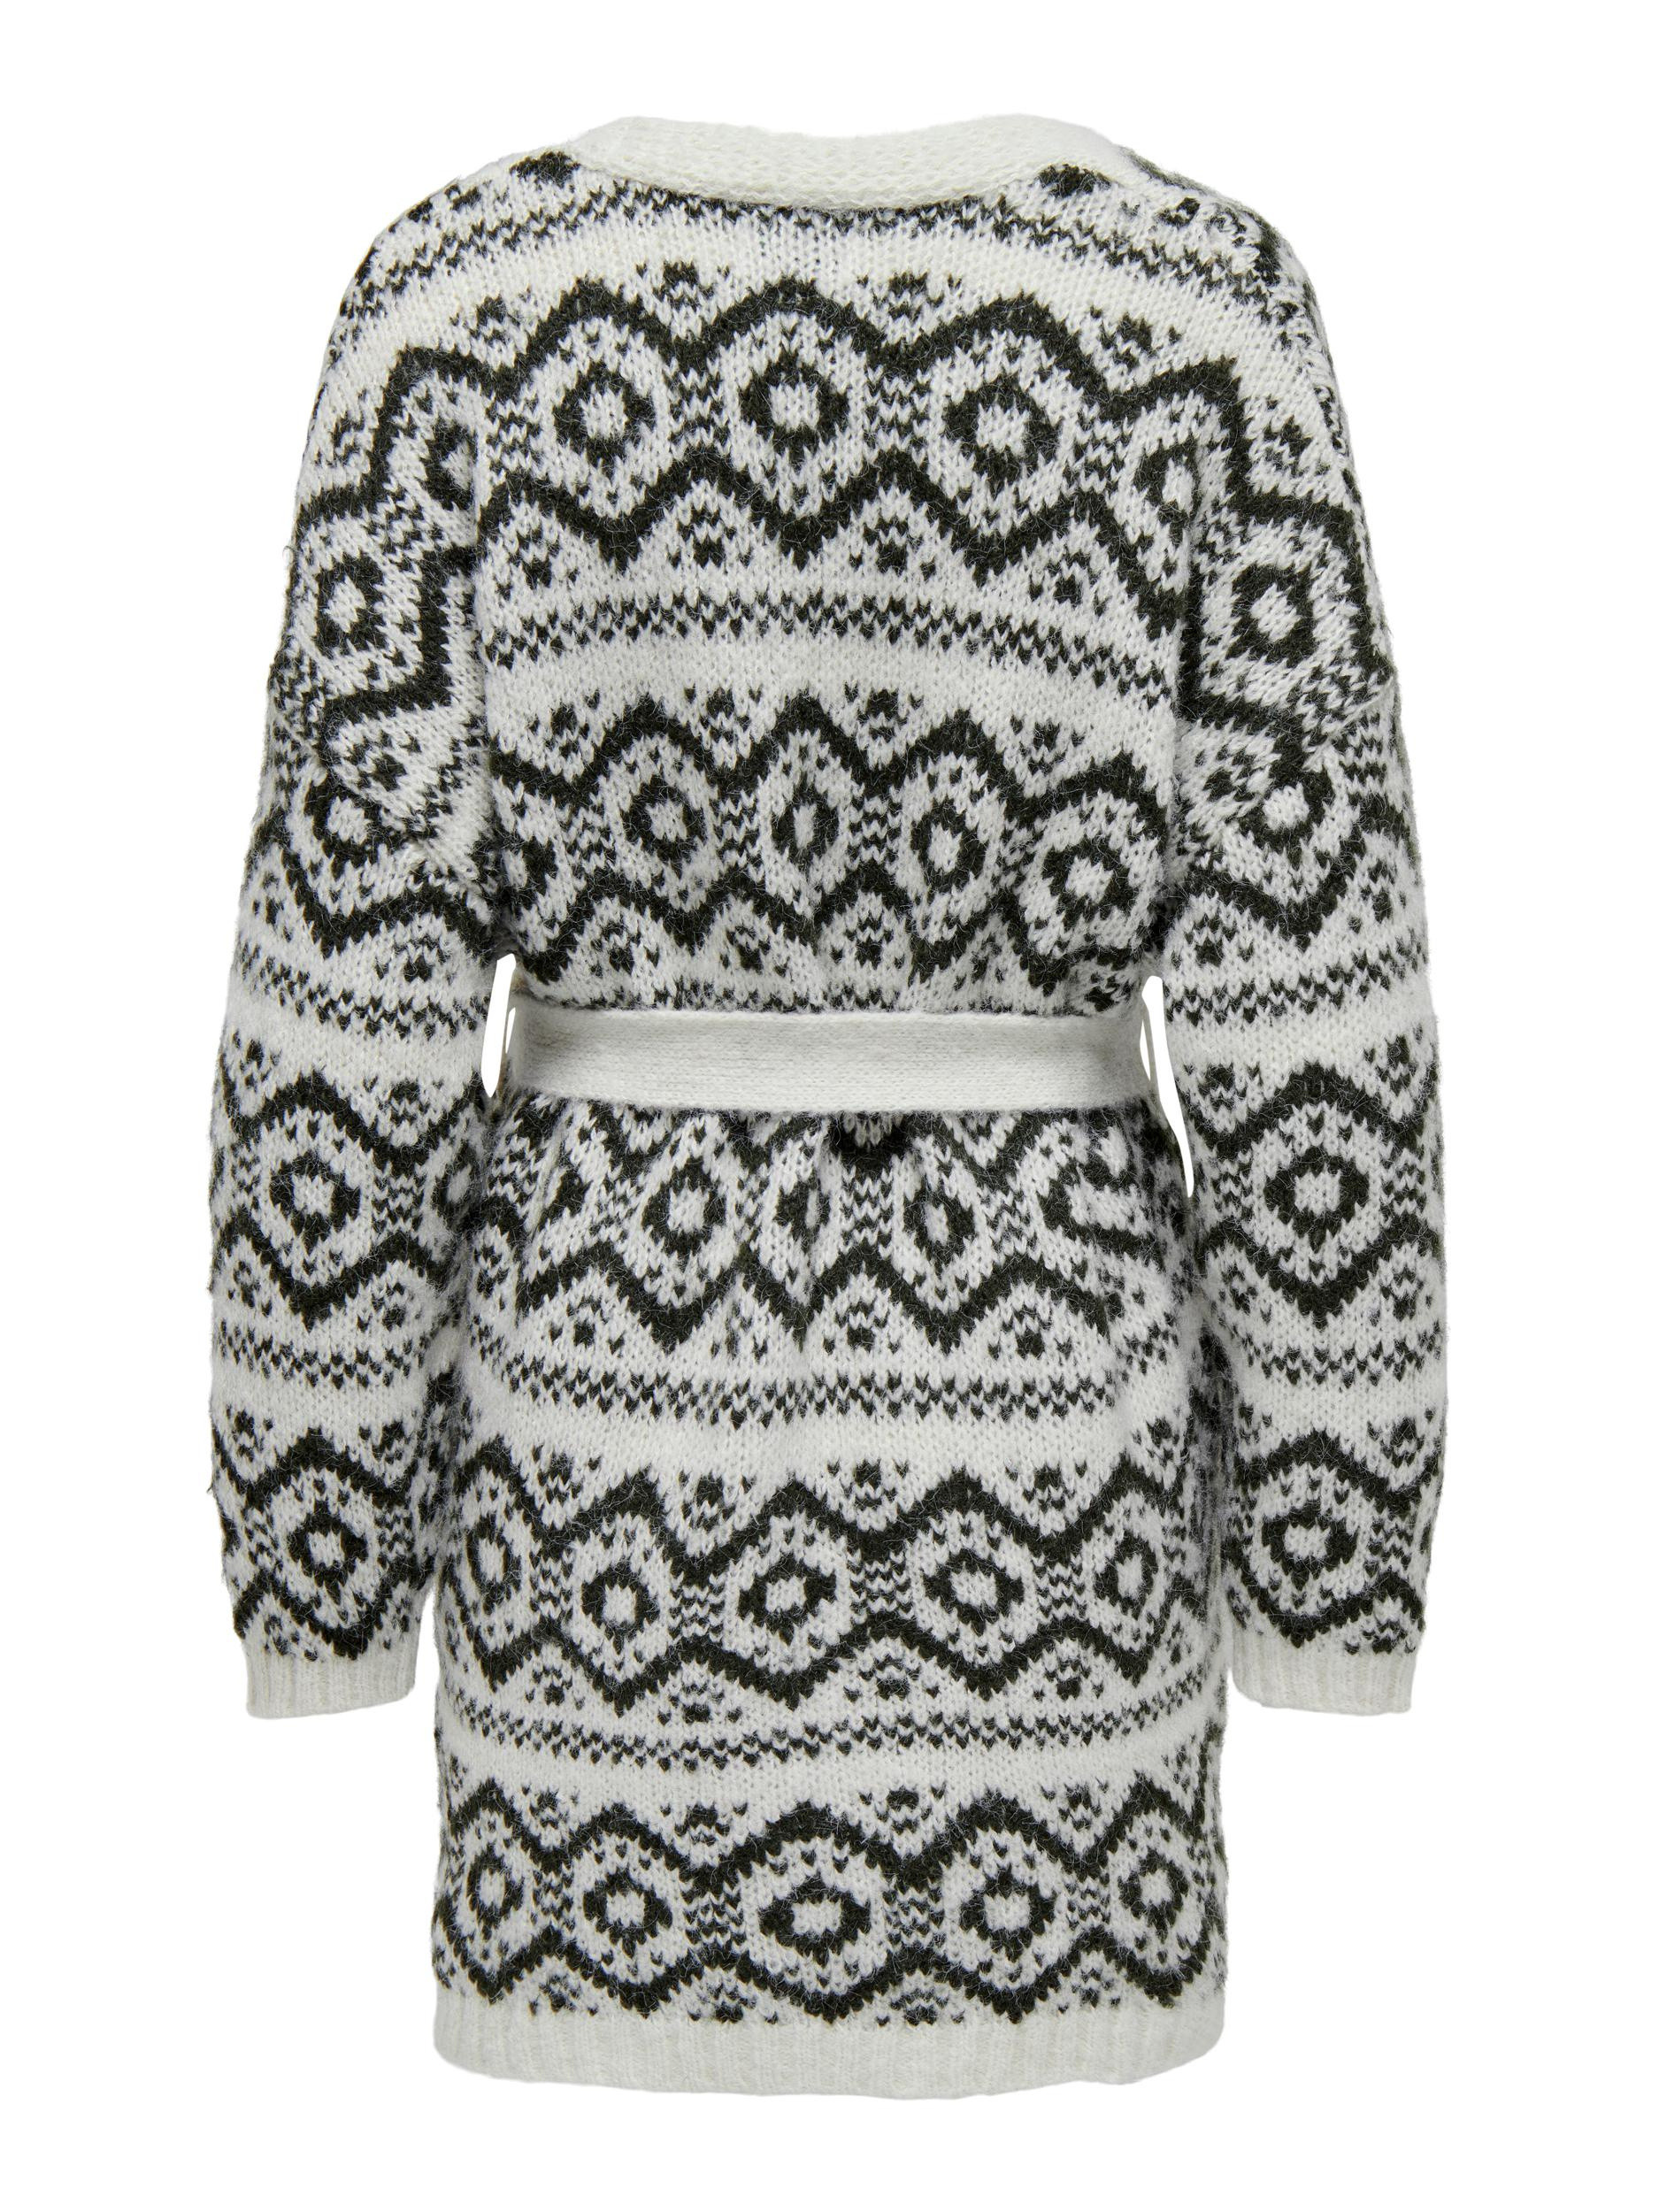 Only - Long cardigan with print, Grey, large image number 1